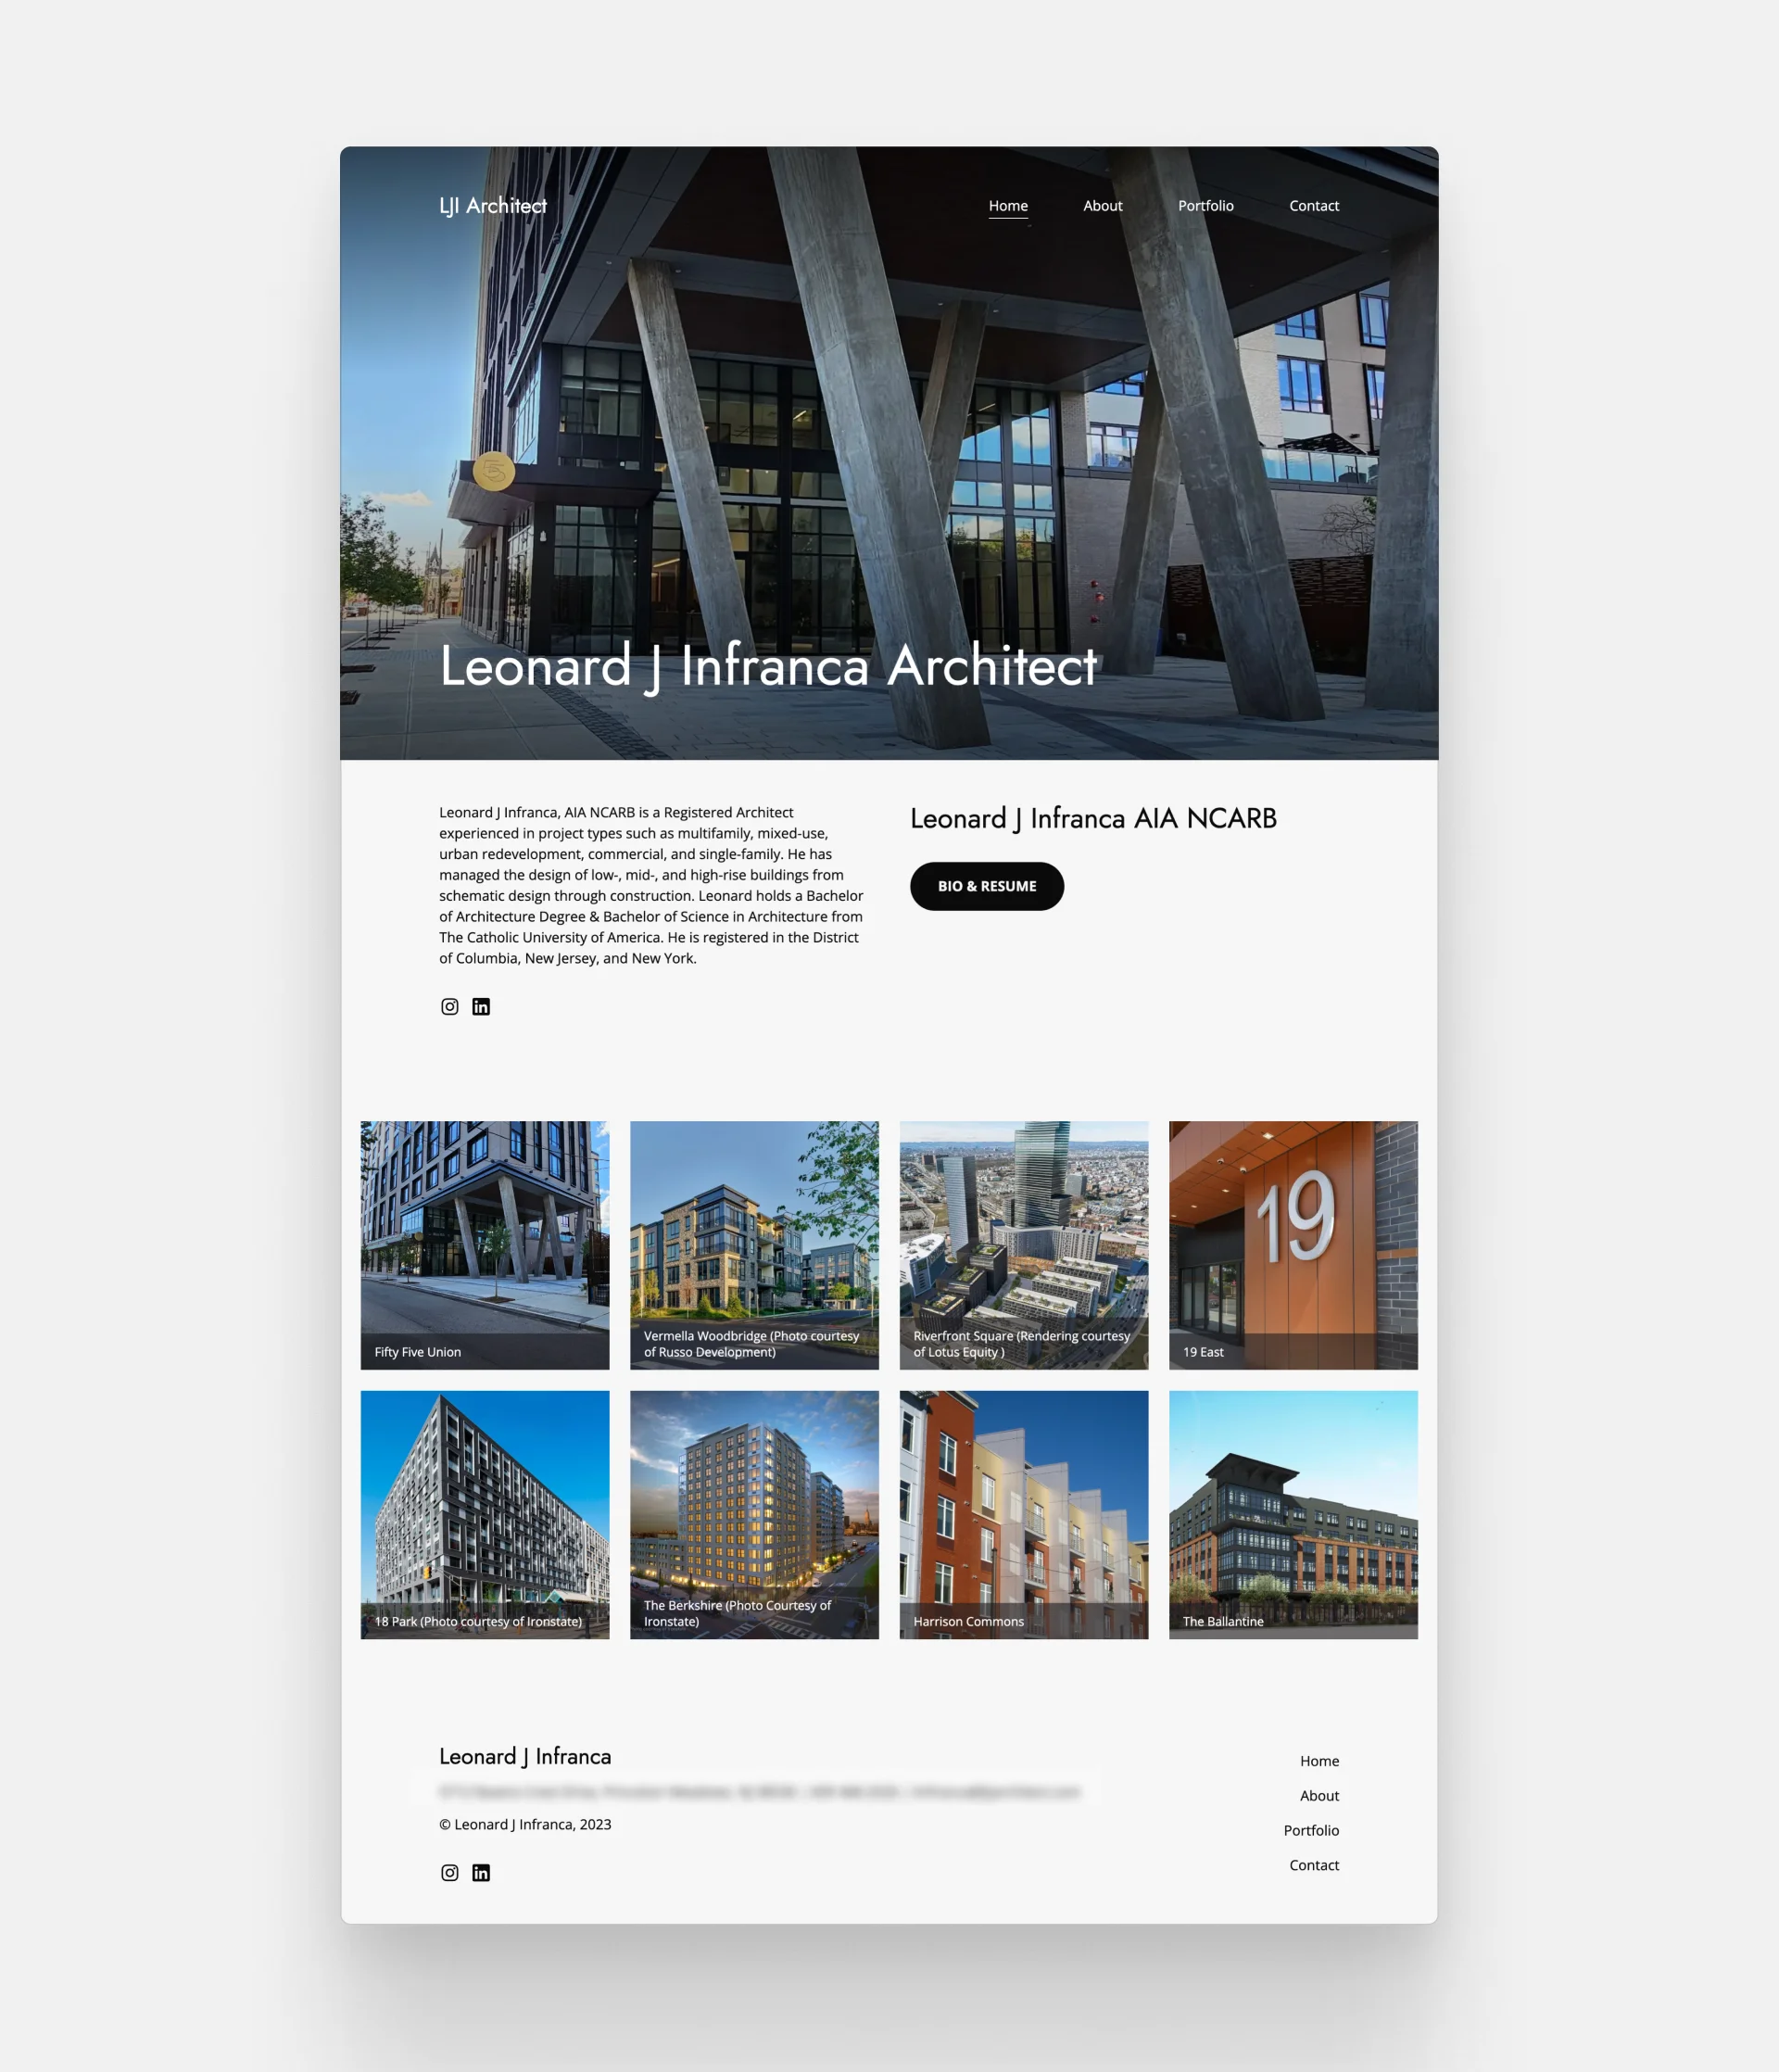 Screenshot of the main page of LJI Architects' website with a large hero image of a skyscraper